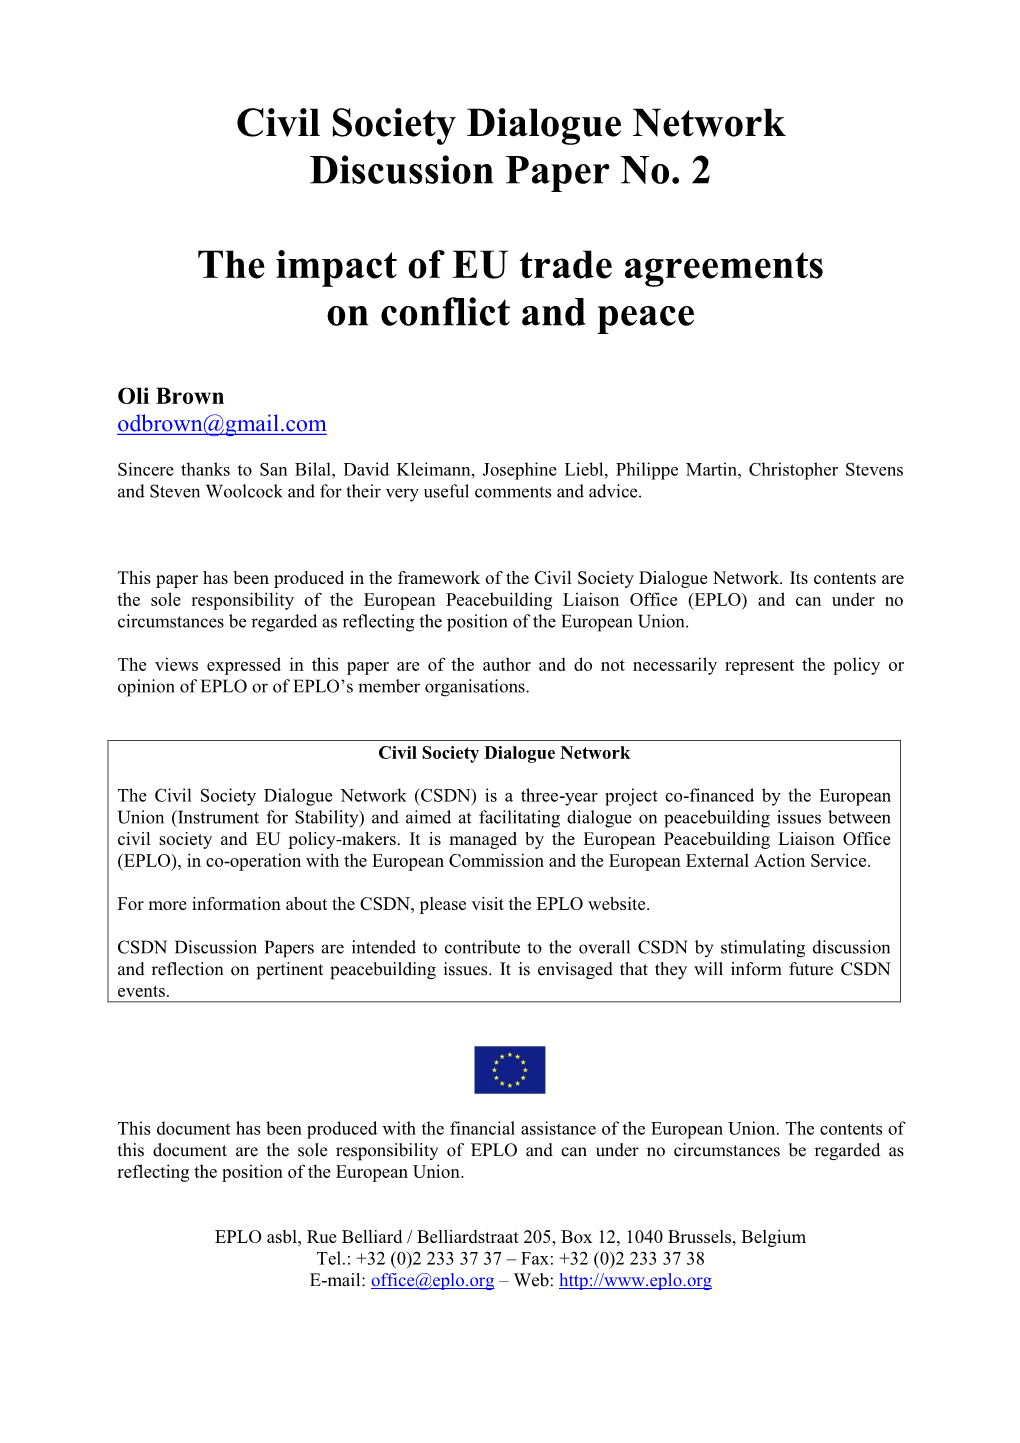 The Impact of EU Trade Agreements on Conflict and Peace